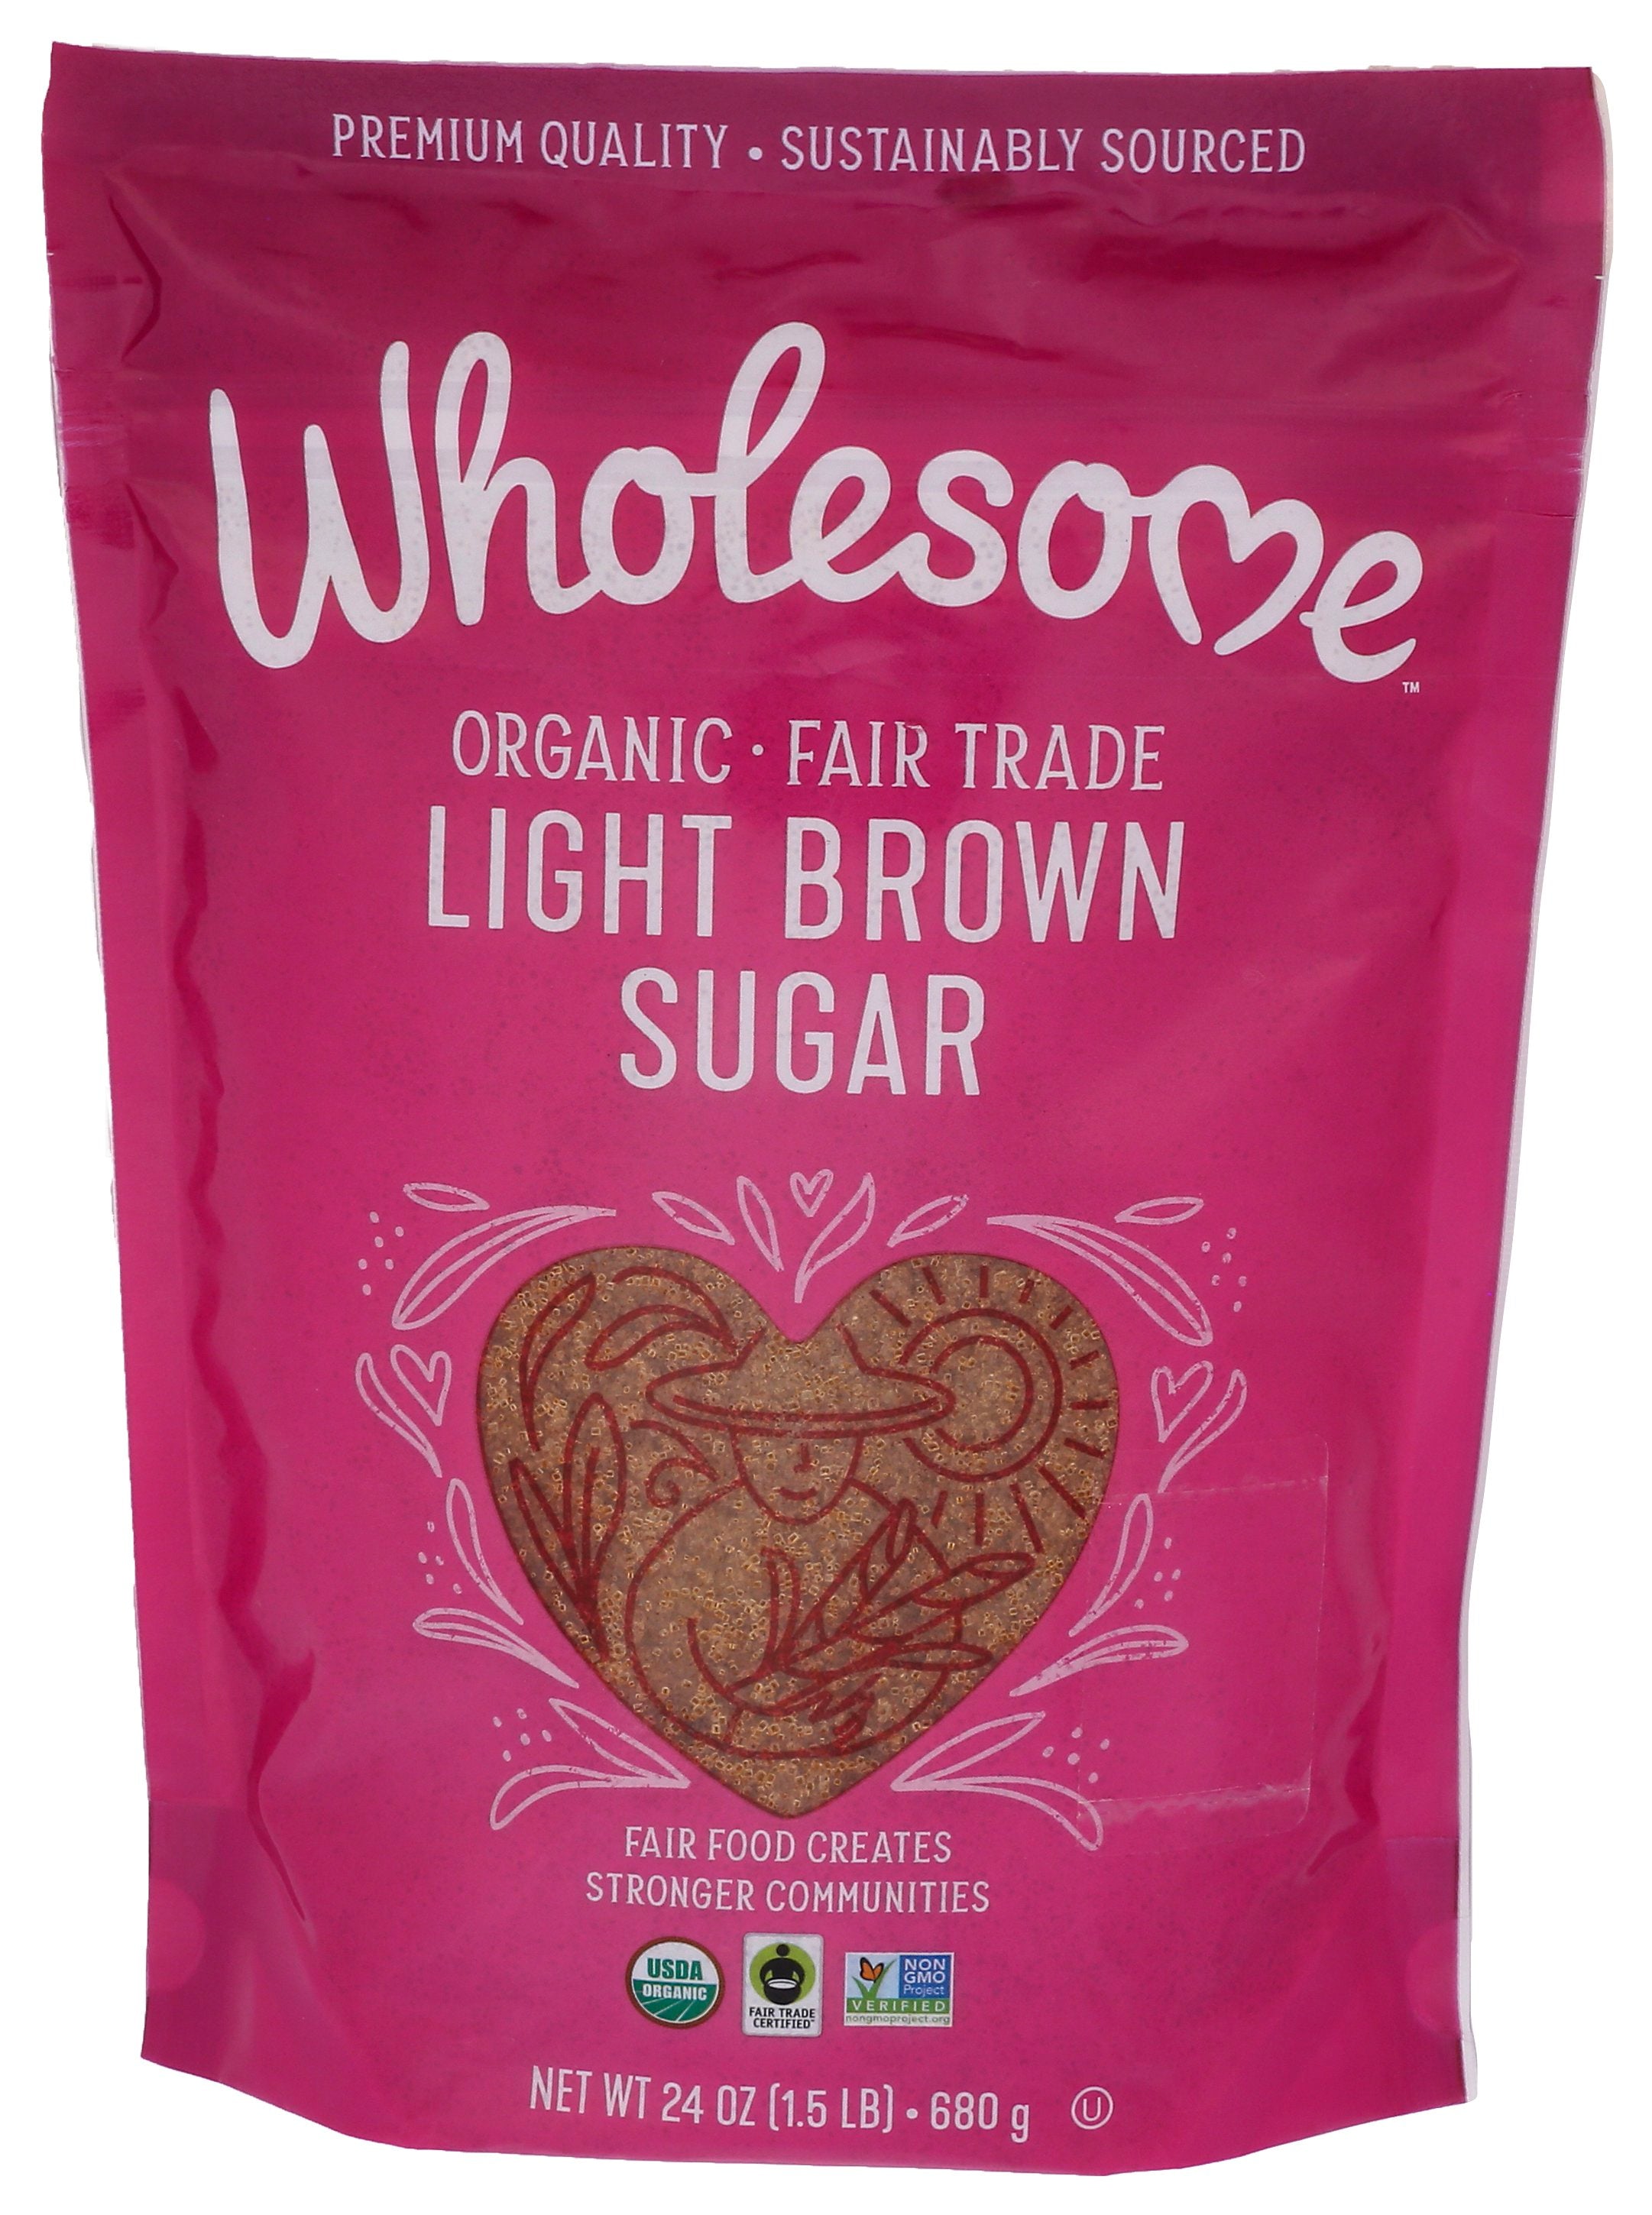 WHOLESOME SUGAR BROWN LITE ORG FTC - Case of 3